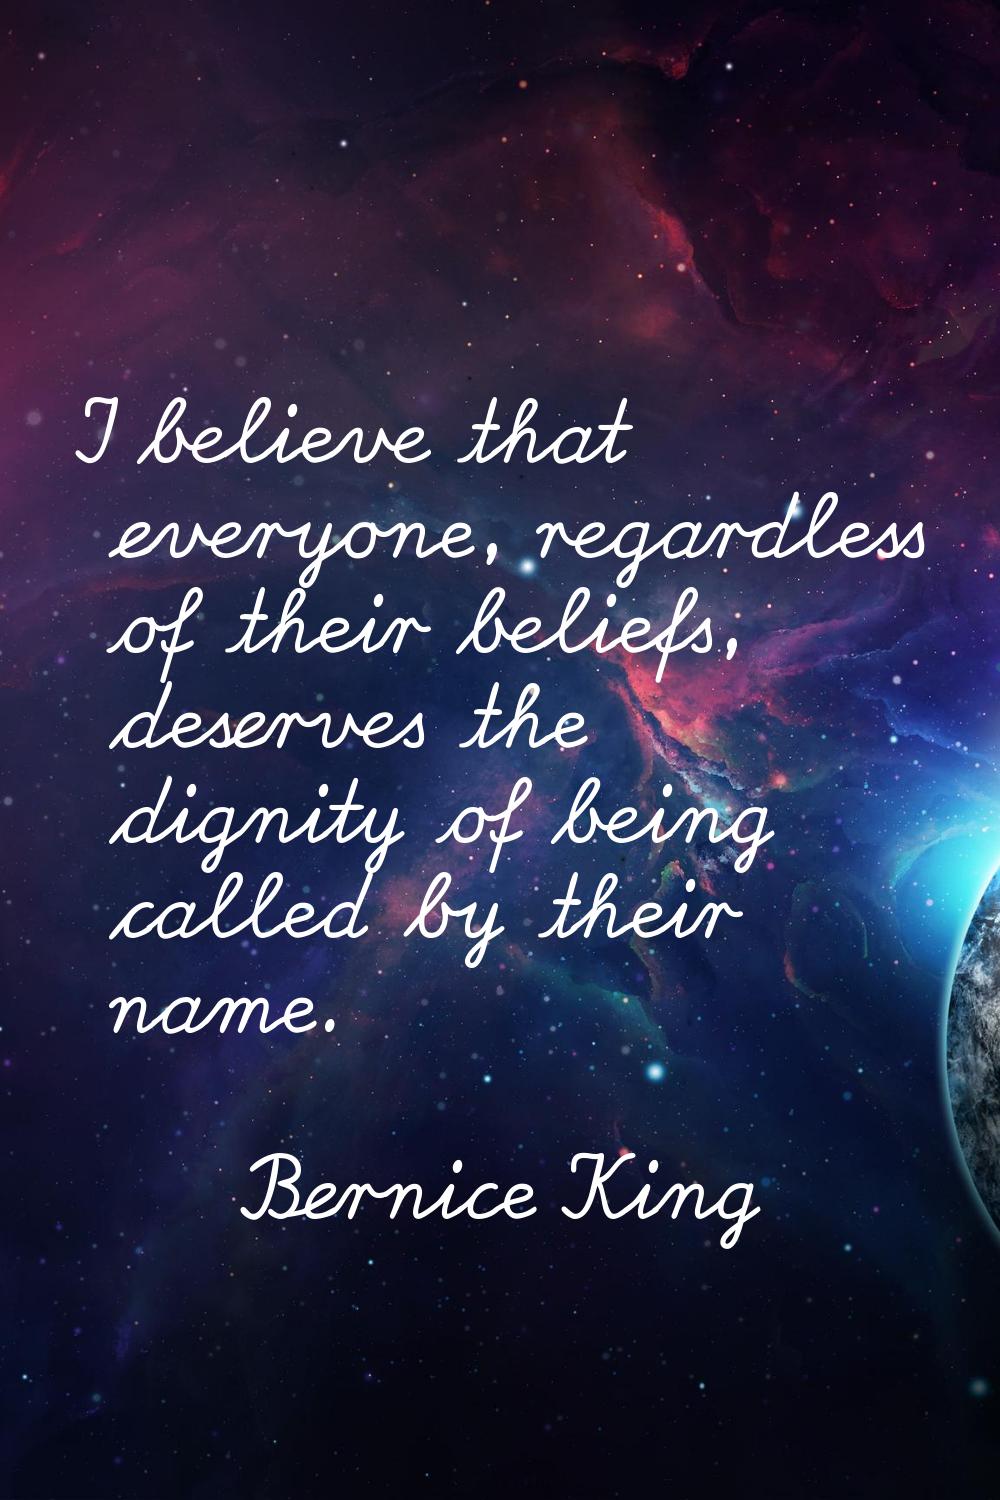 I believe that everyone, regardless of their beliefs, deserves the dignity of being called by their